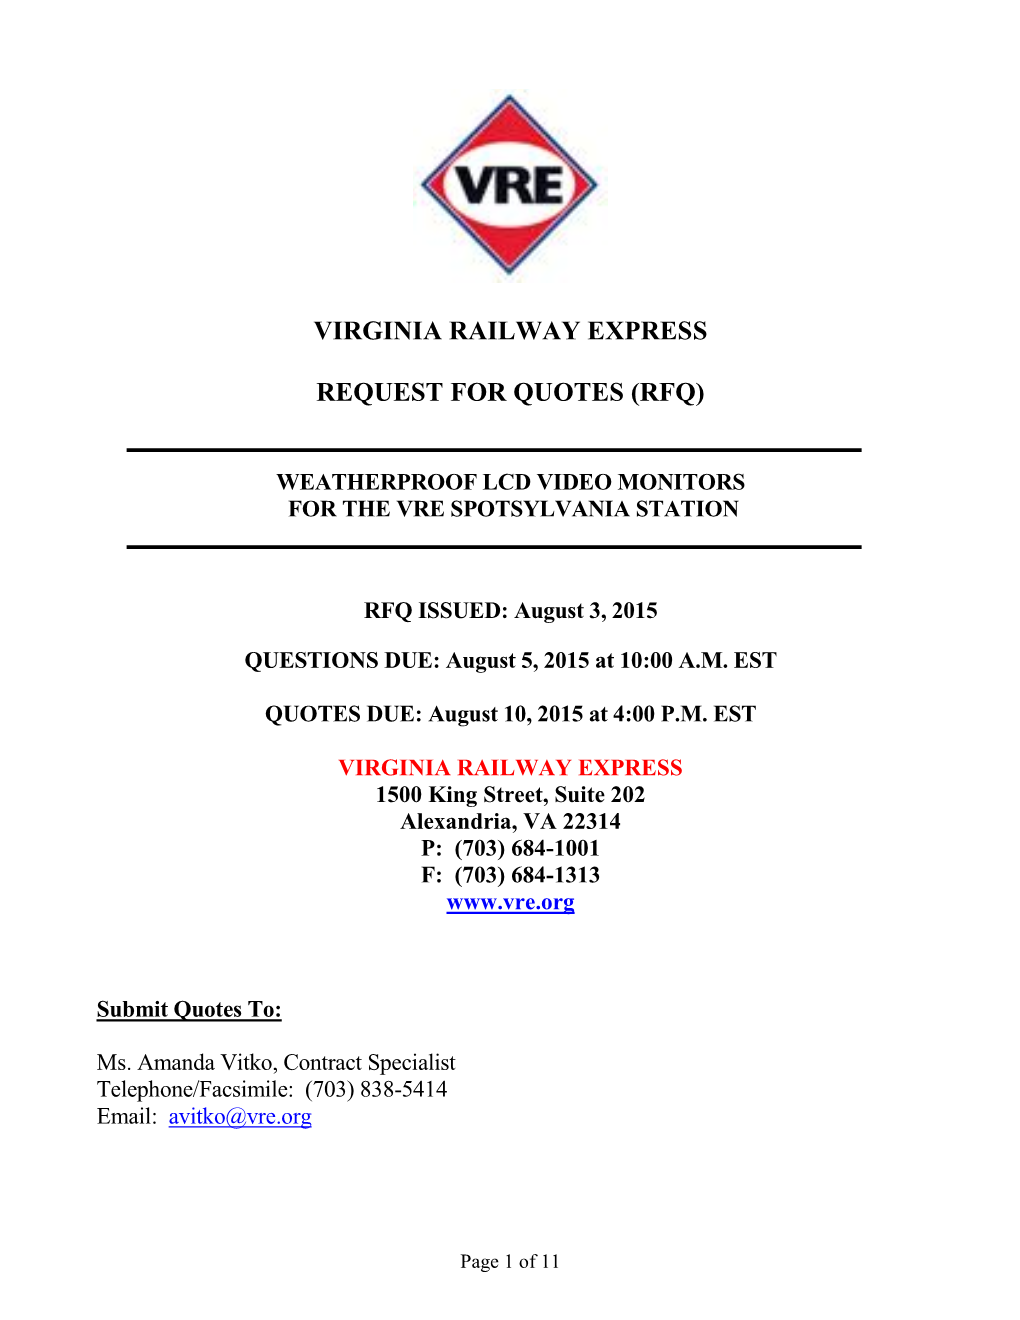 Virginia Railway Express Request for Quotes